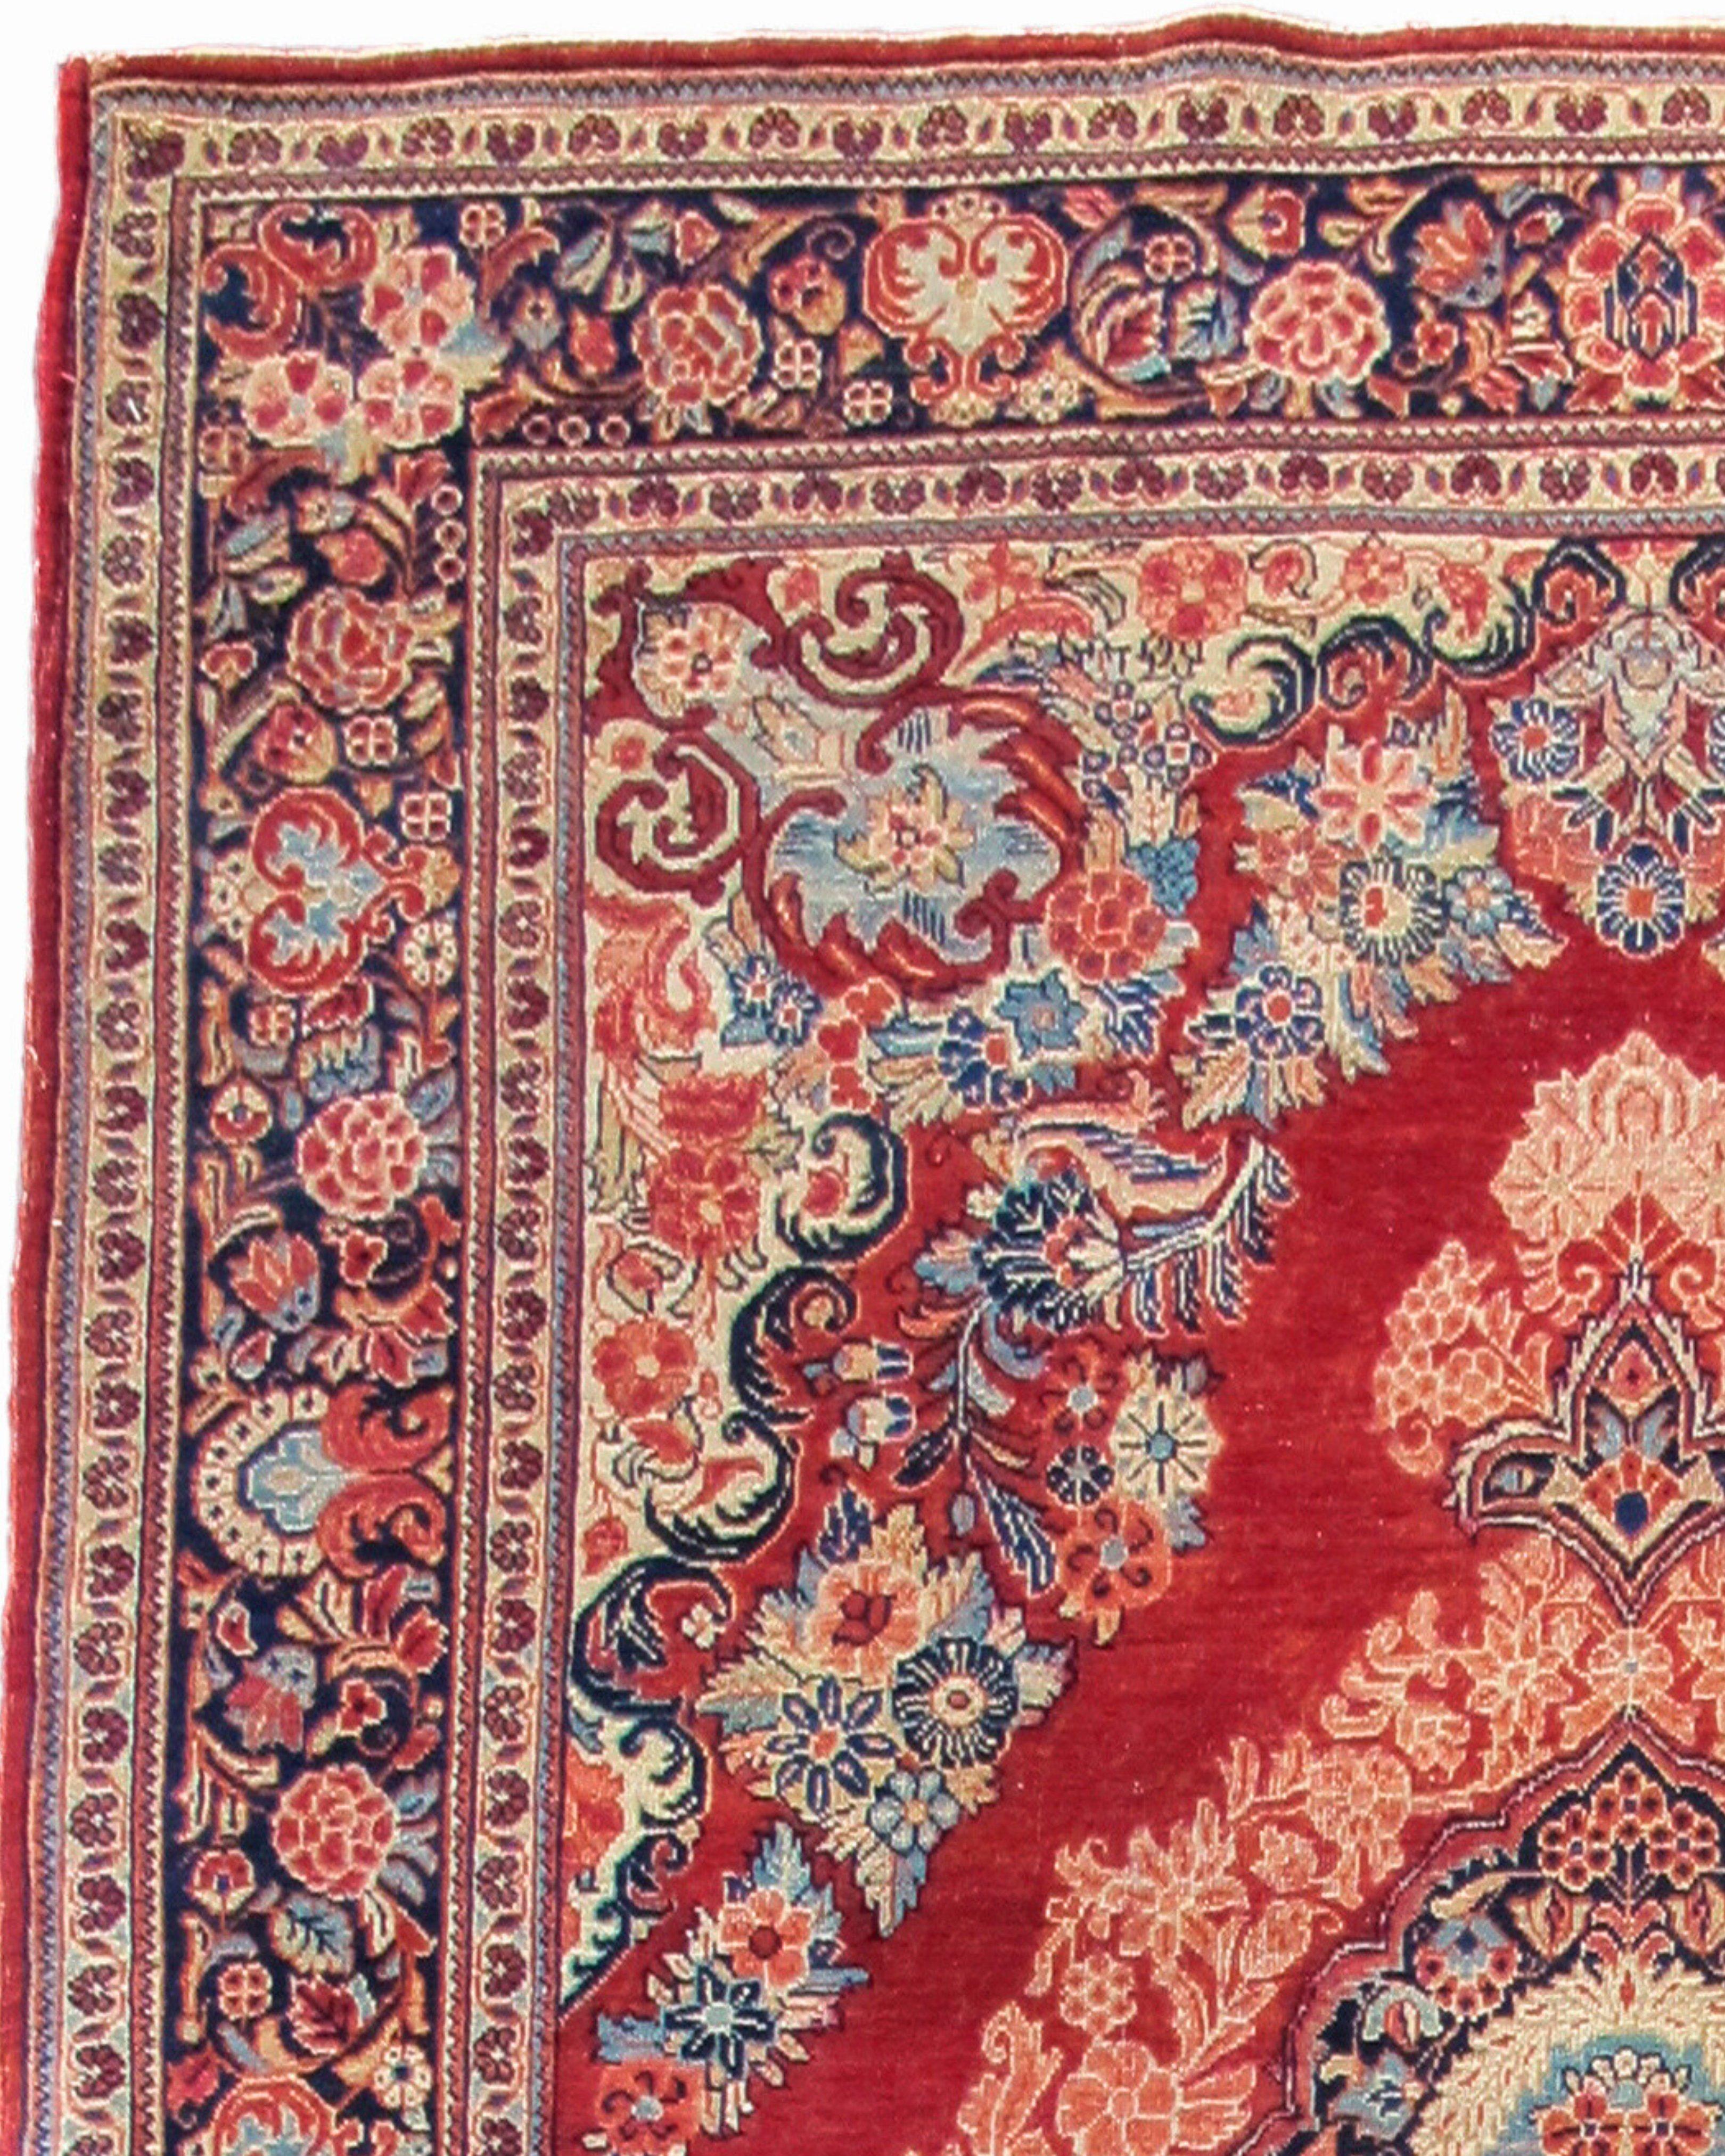 Hand-Woven Antique Persian Sarouk Rug, Early 20th Century For Sale